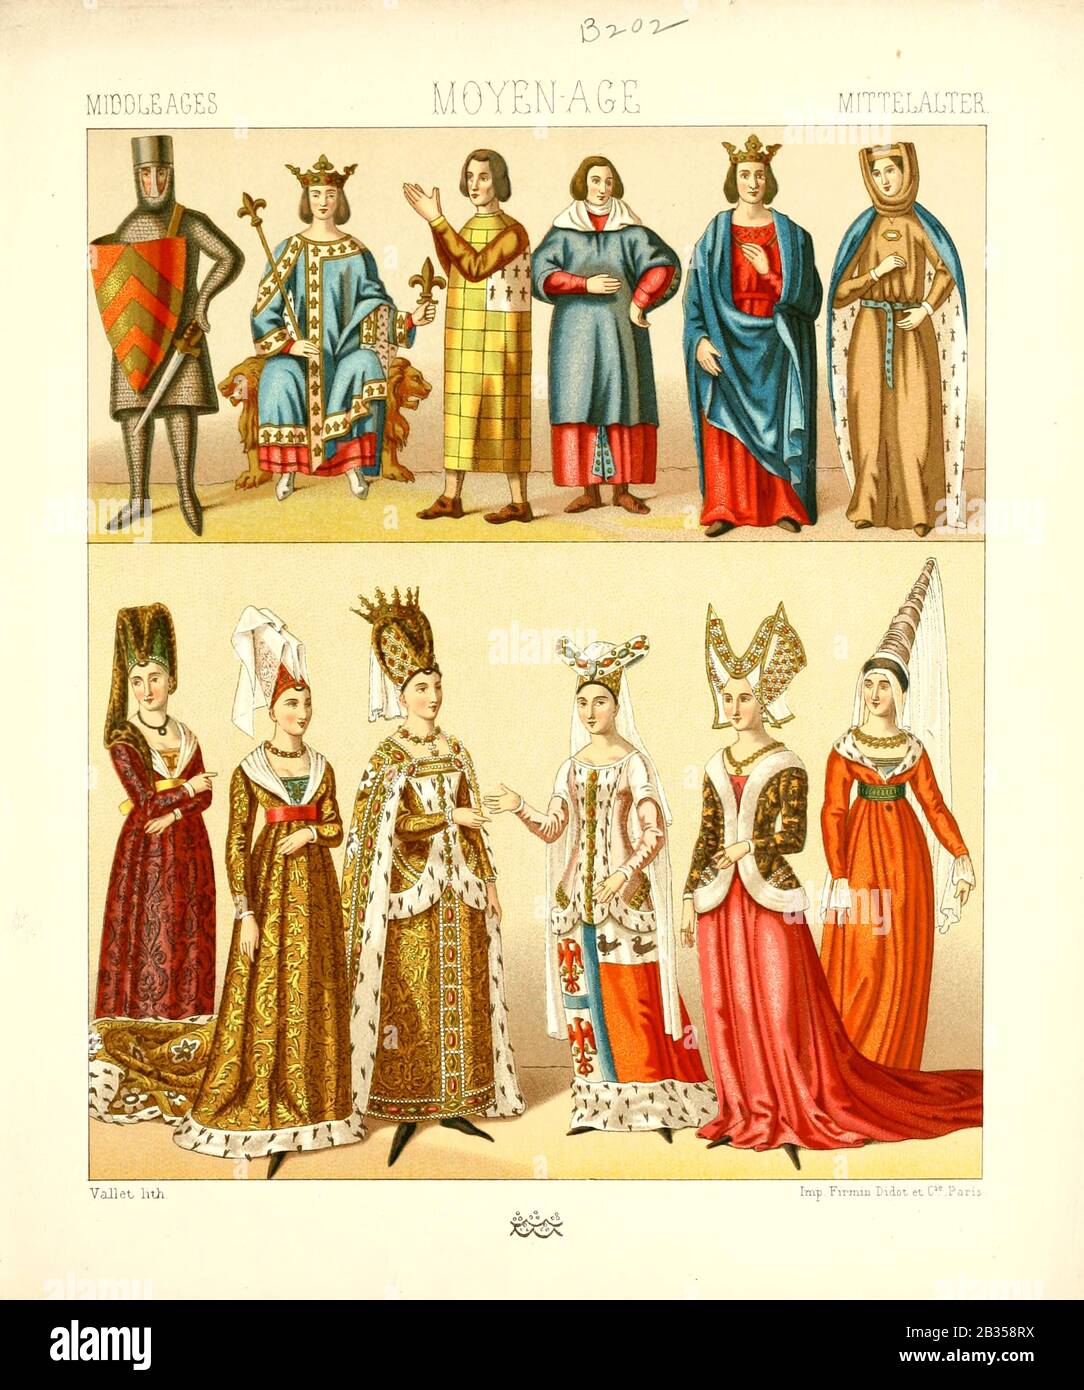 Clothes in Medieval England - World History Encyclopedia